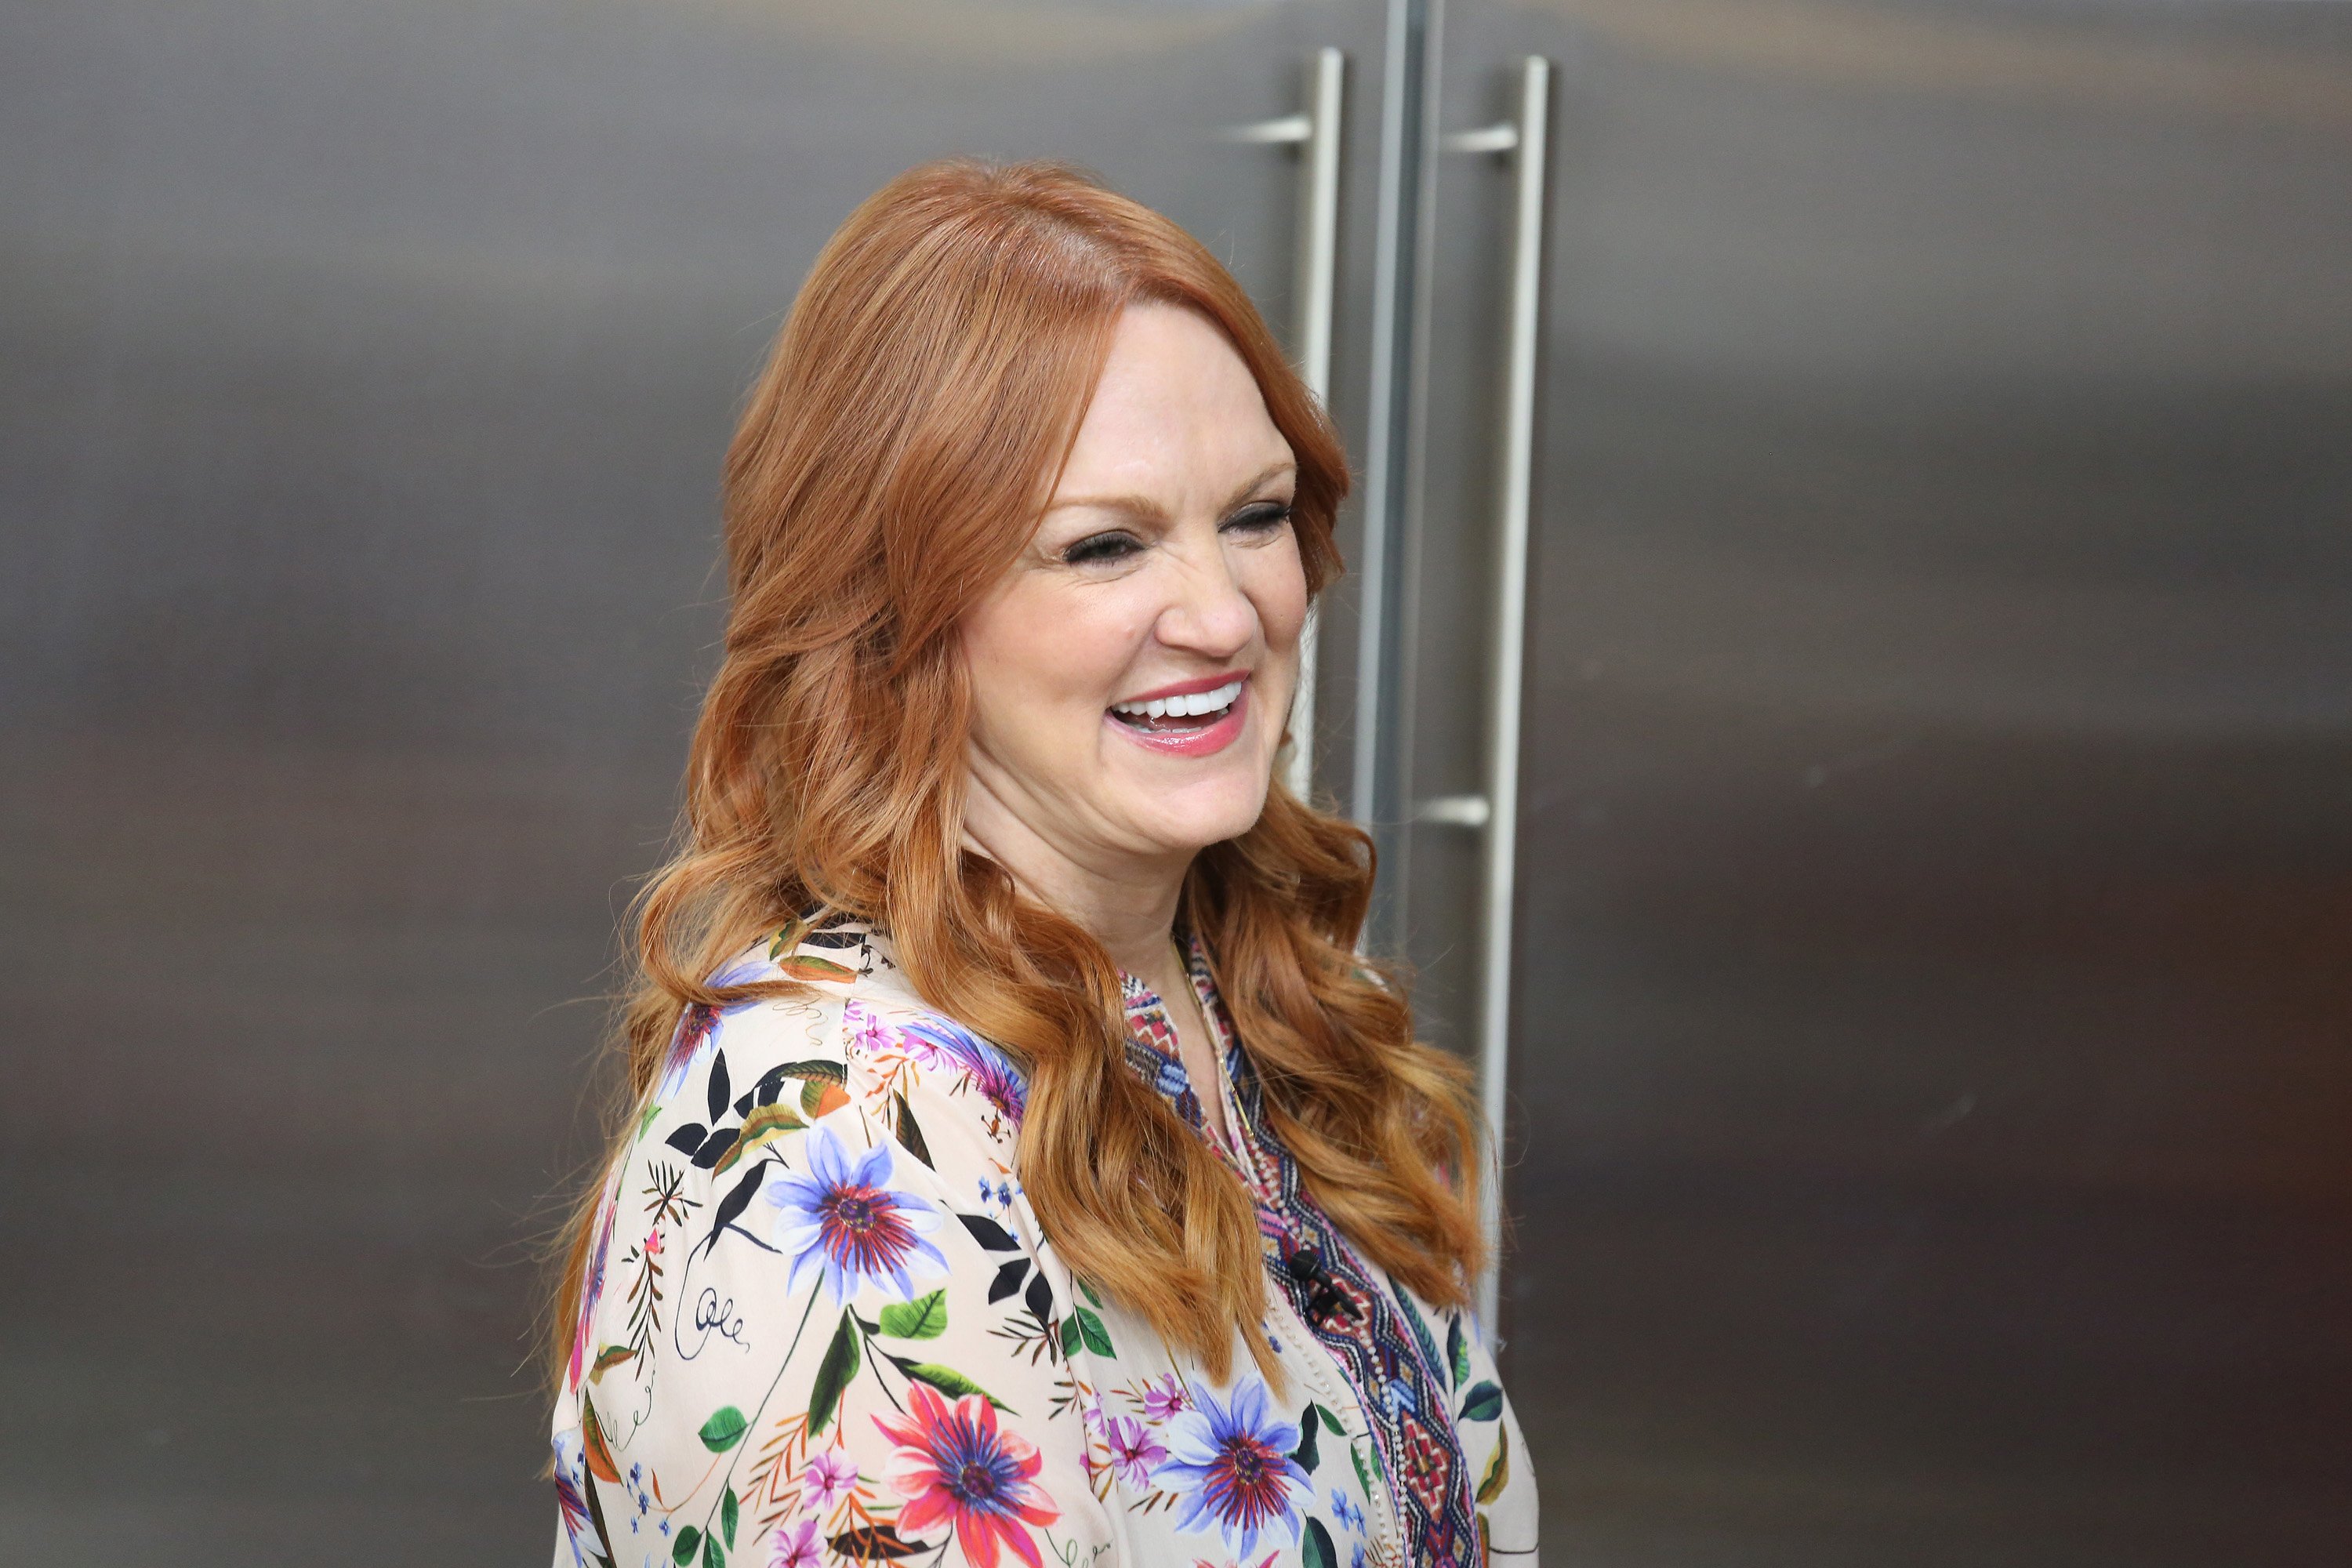 Ree Drummond smiles while wearing a floral top.